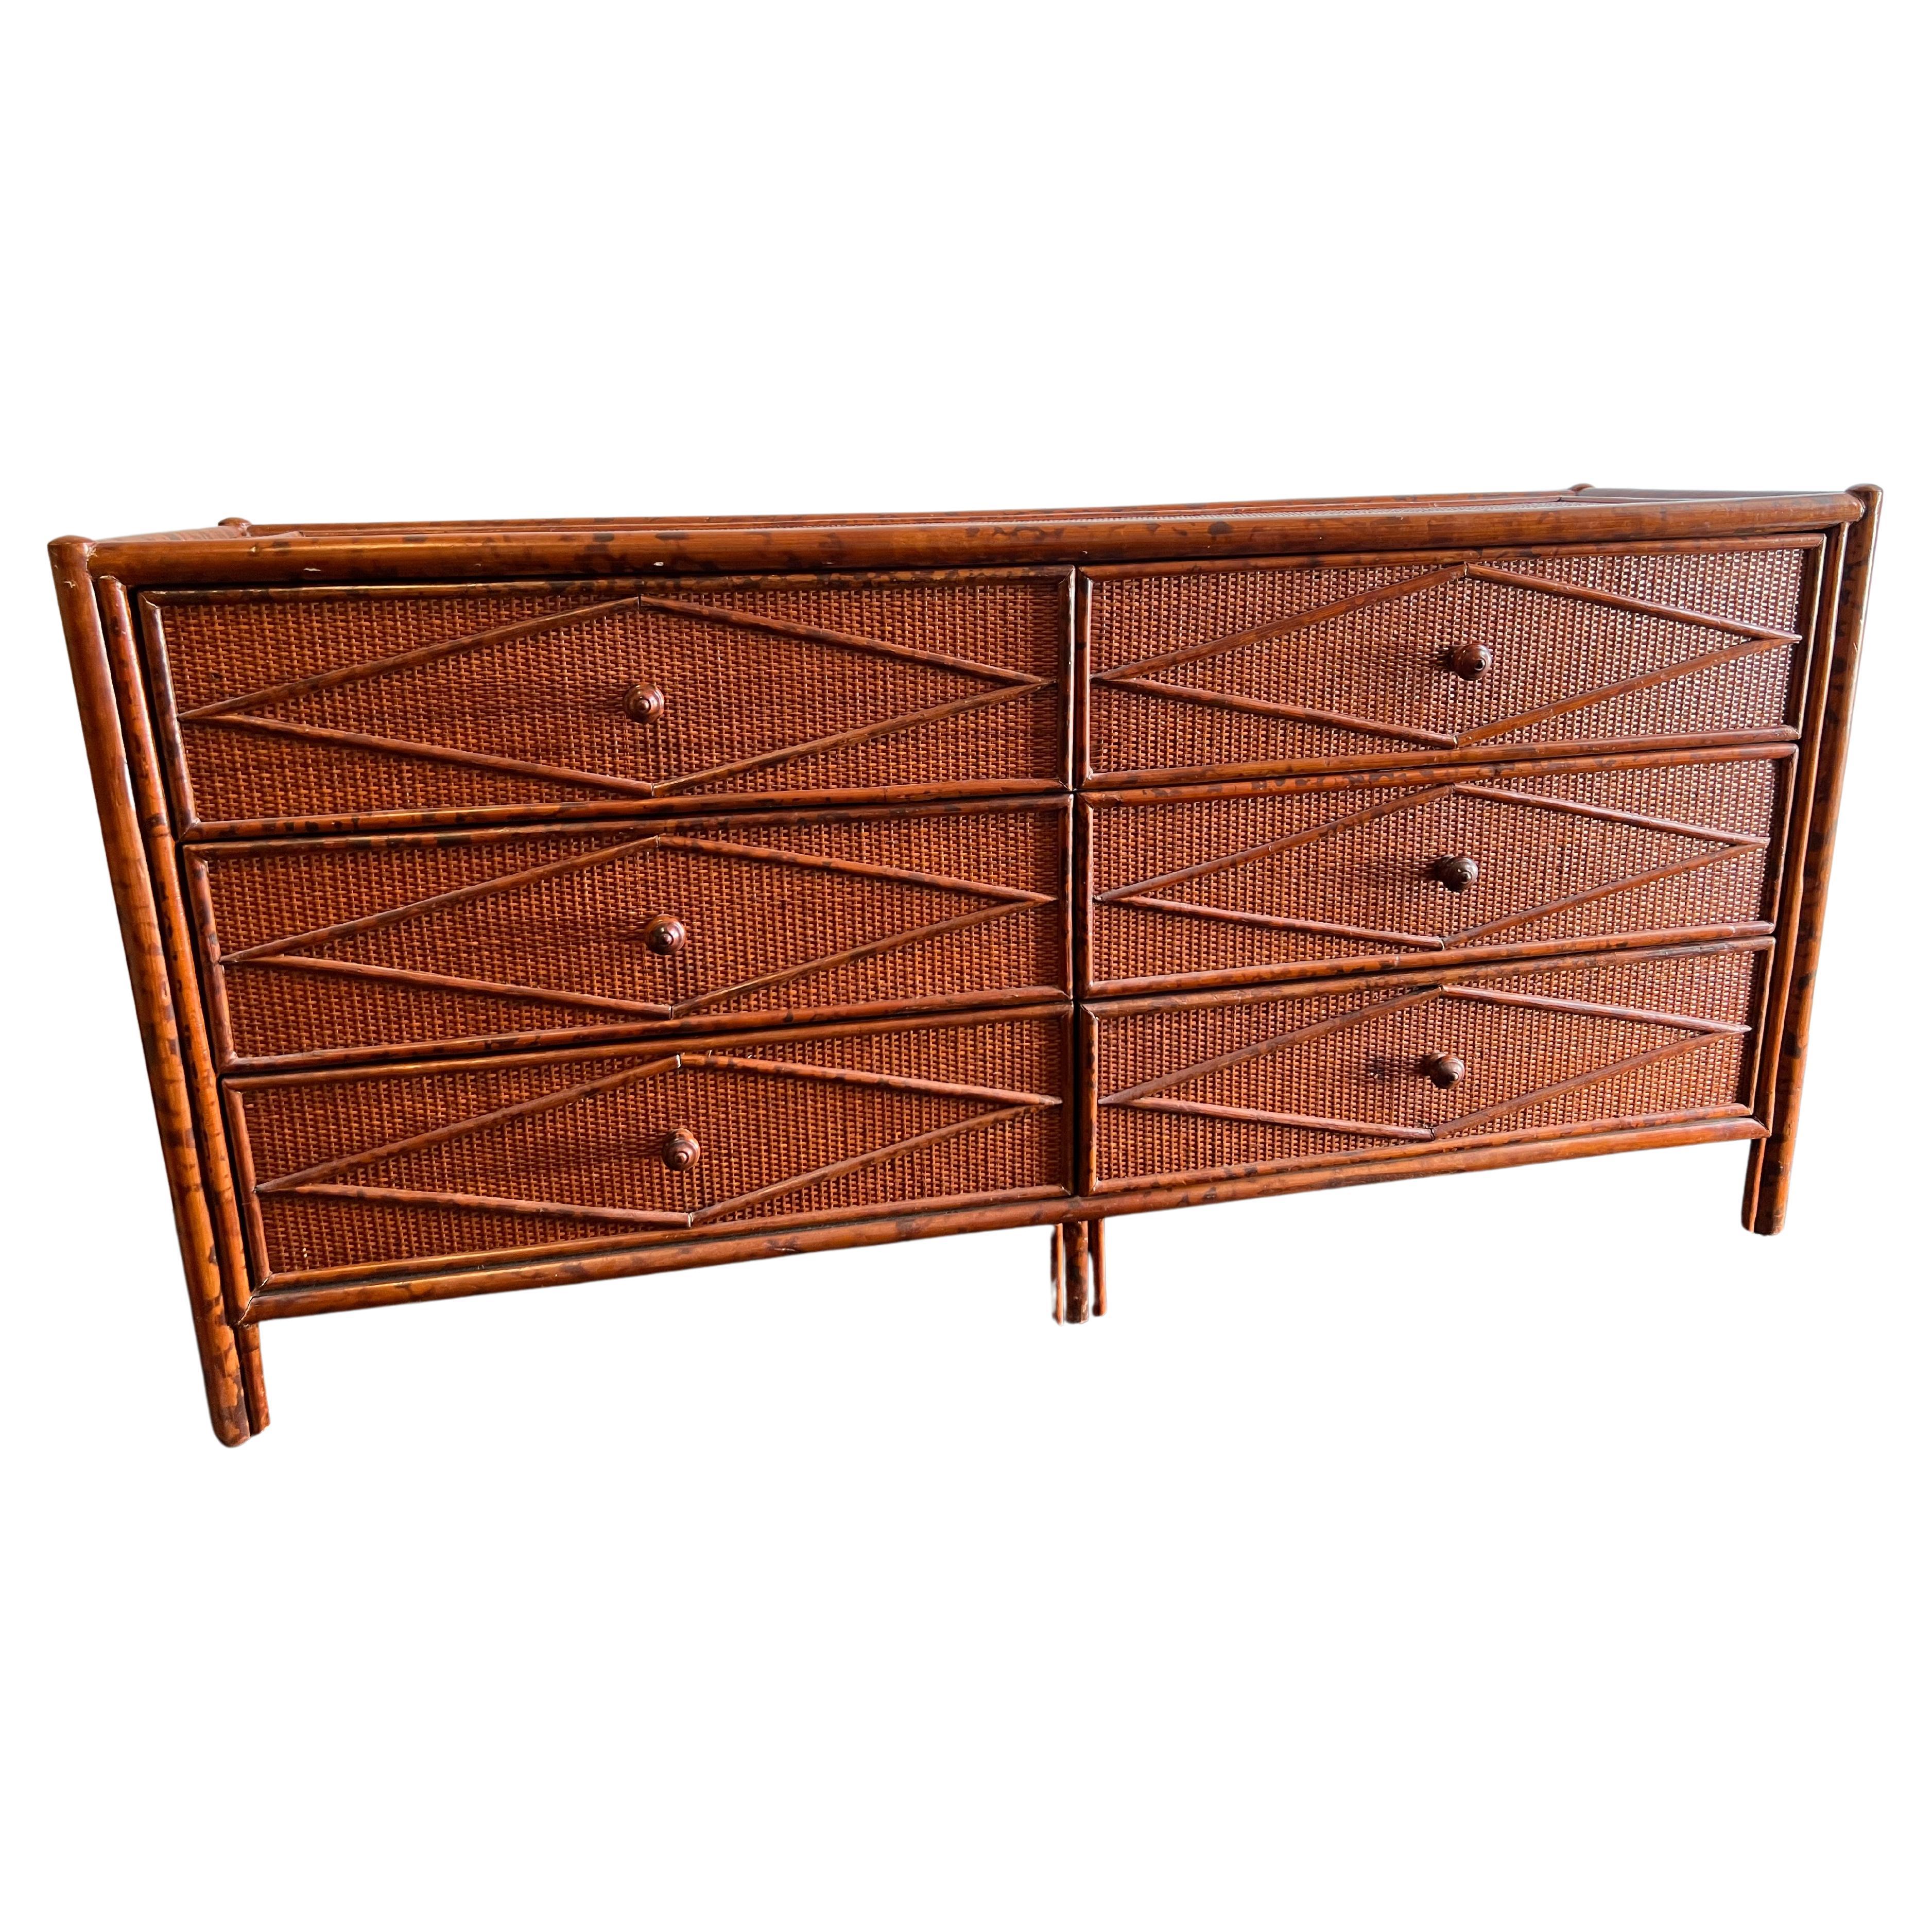 British Colonial Style Burnt Bamboo and Cane Dresser For Sale